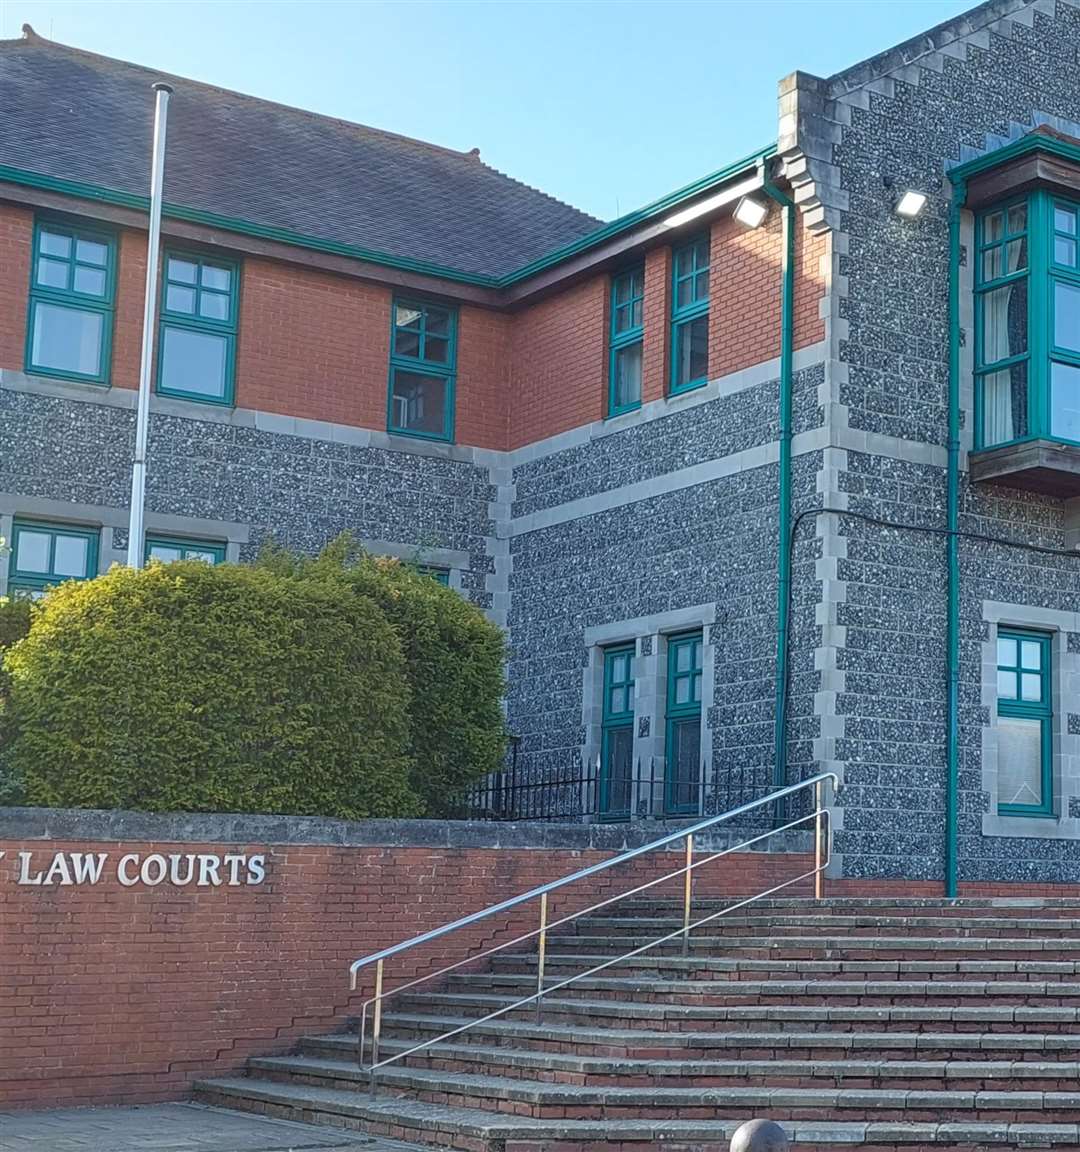 He was jailed at Canterbury Crown Court